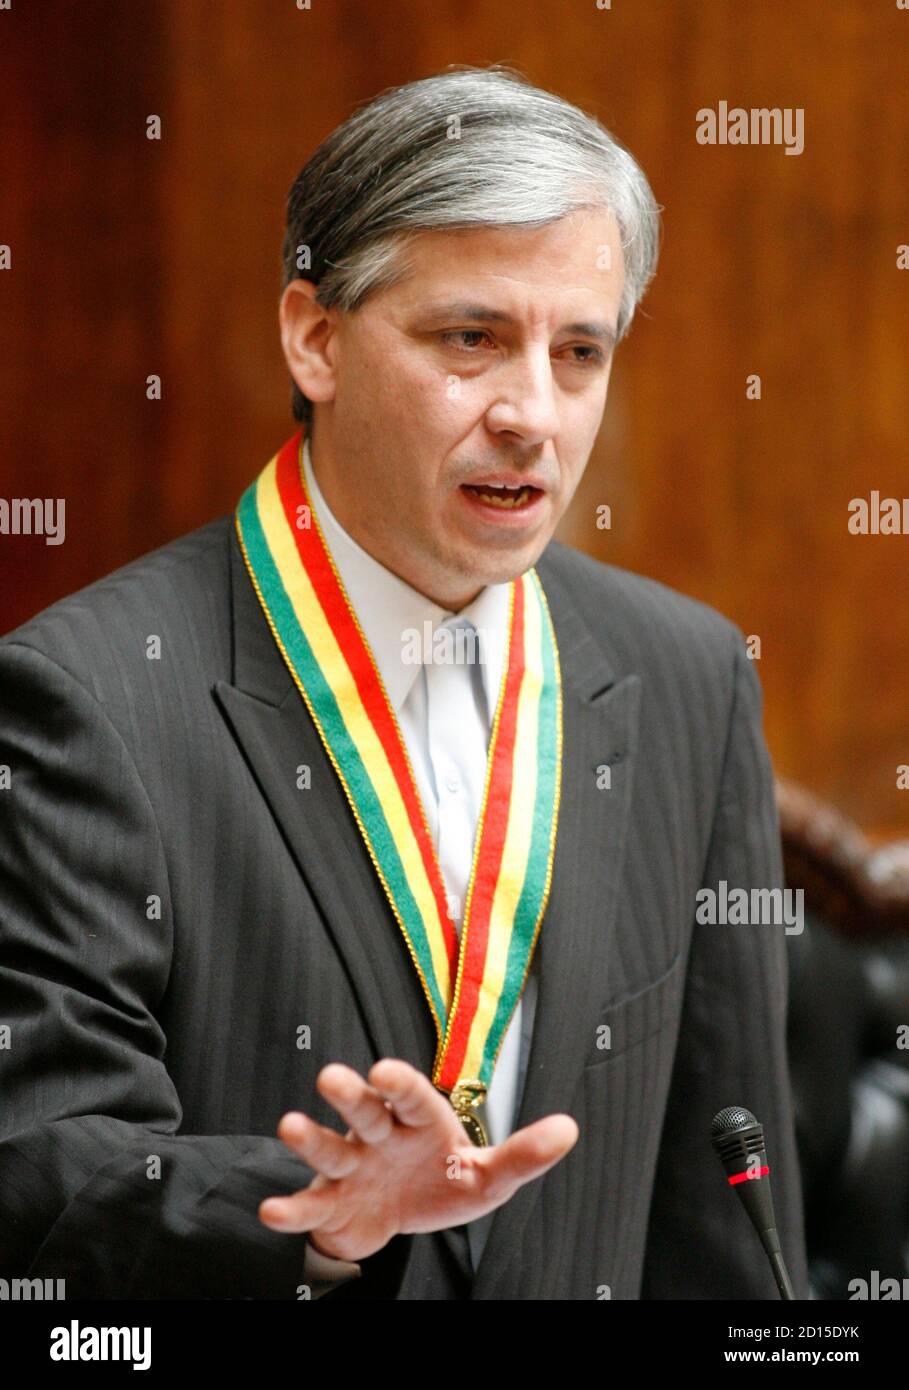 Bolivian Vice President Alvaro Garcia Linera speaks at a congress meeting  on the day of Bolivia's President Evo Morales first anniversary in office,  in La Paz January 22, 2007. REUTERS/David Mercado (BOLIVIA